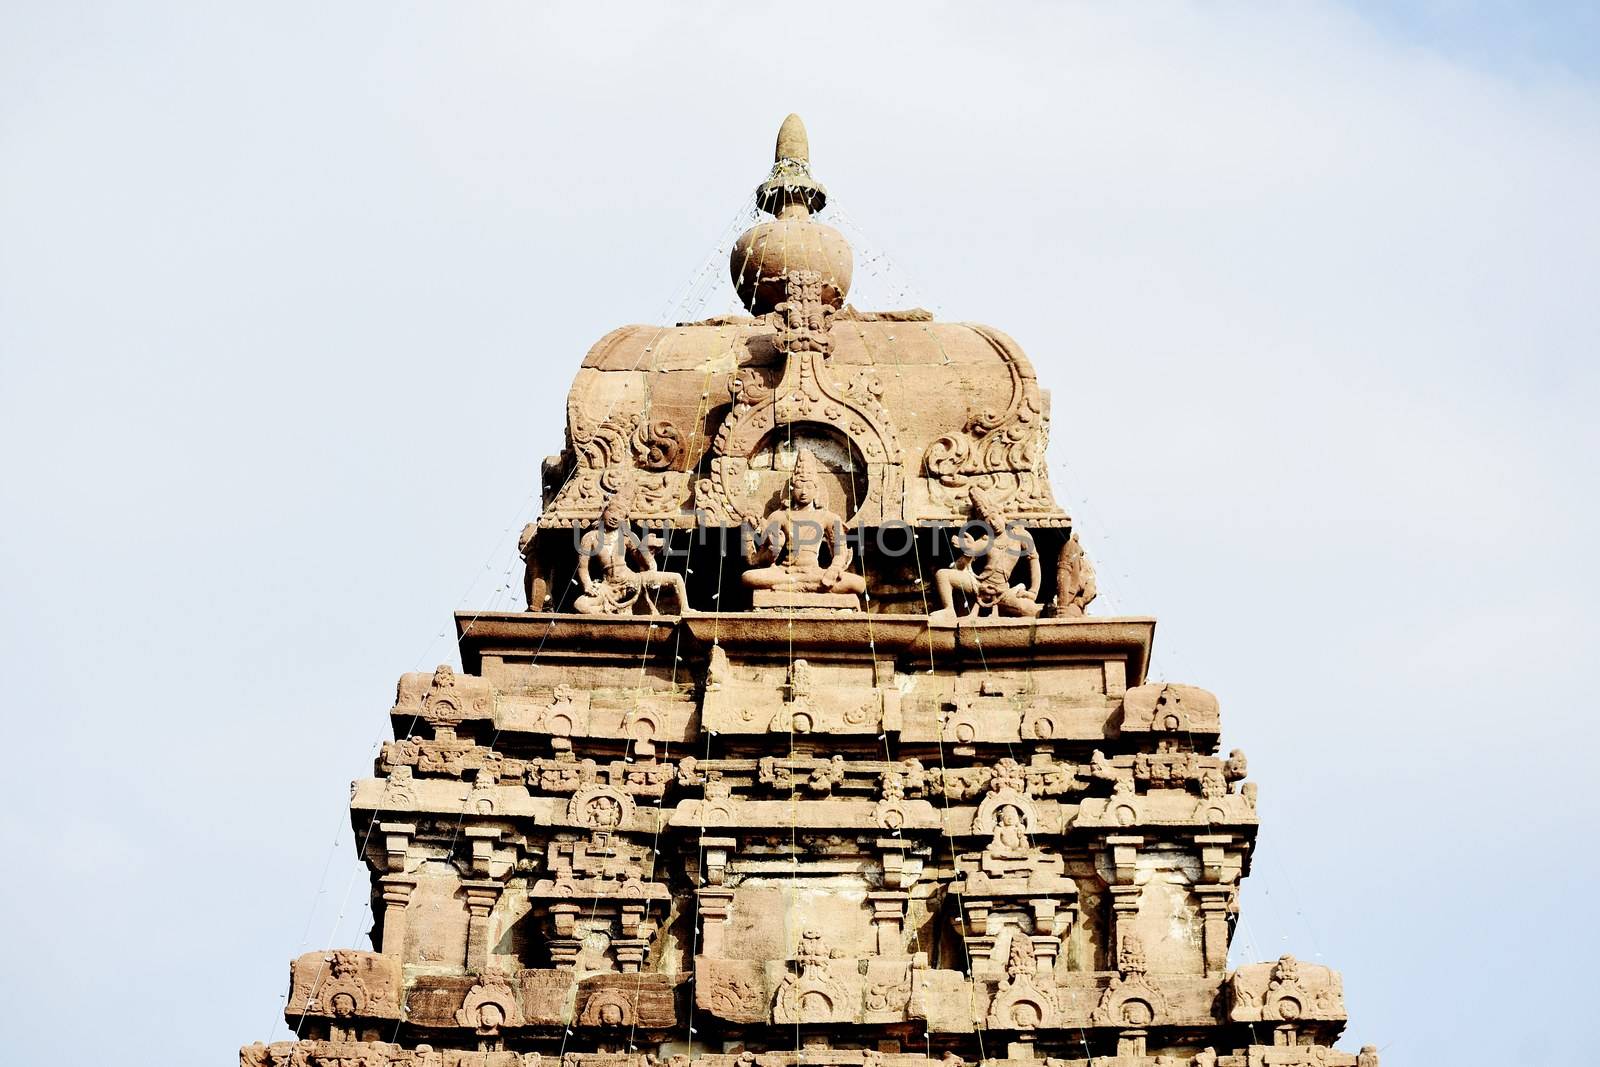 An ancient Temple situated at Kurnool, AP India by ravindrabhu165165@gmail.com